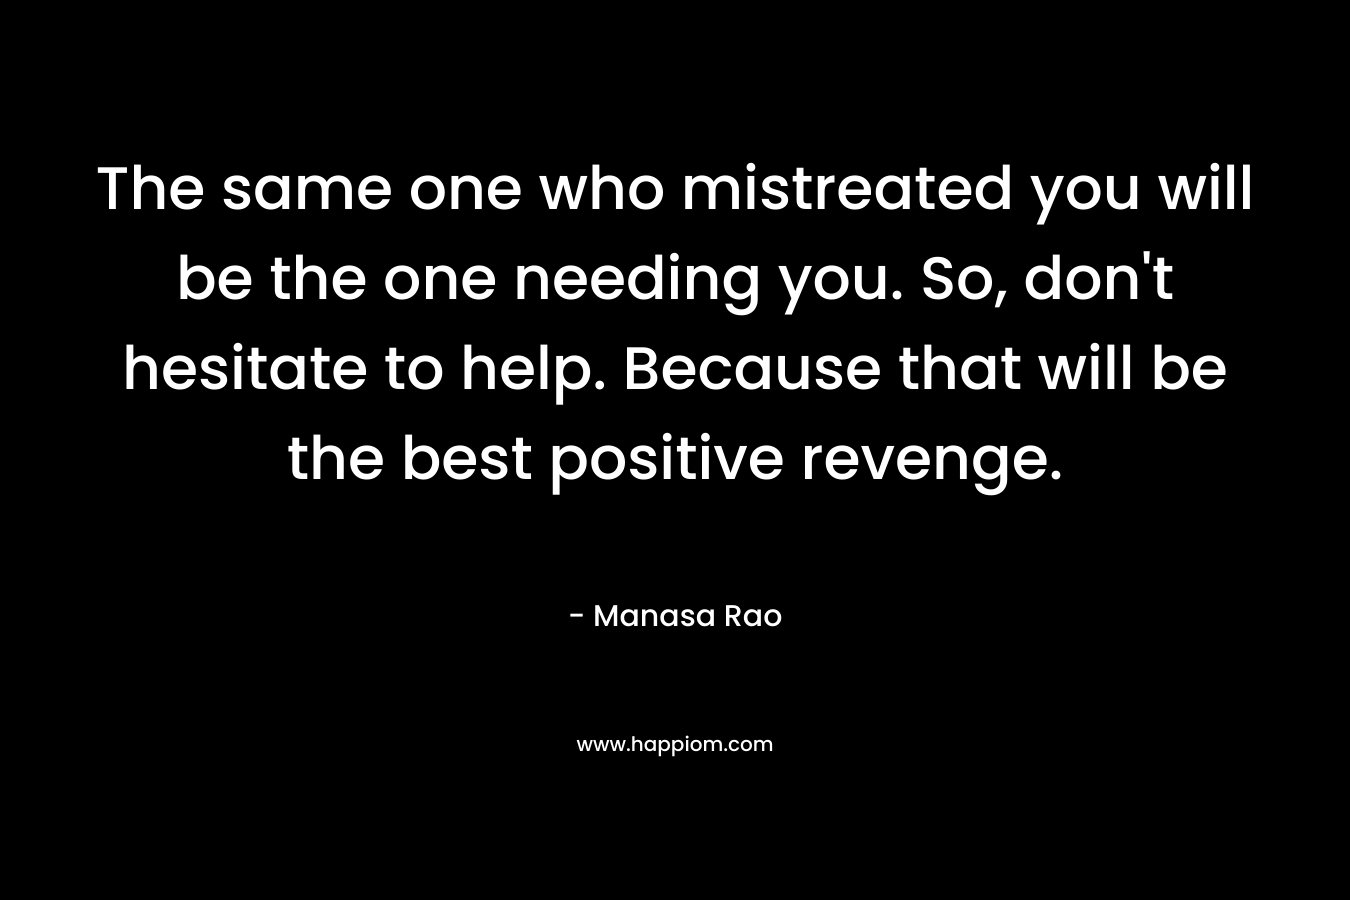 The same one who mistreated you will be the one needing you. So, don’t hesitate to help. Because that will be the best positive revenge. – Manasa Rao